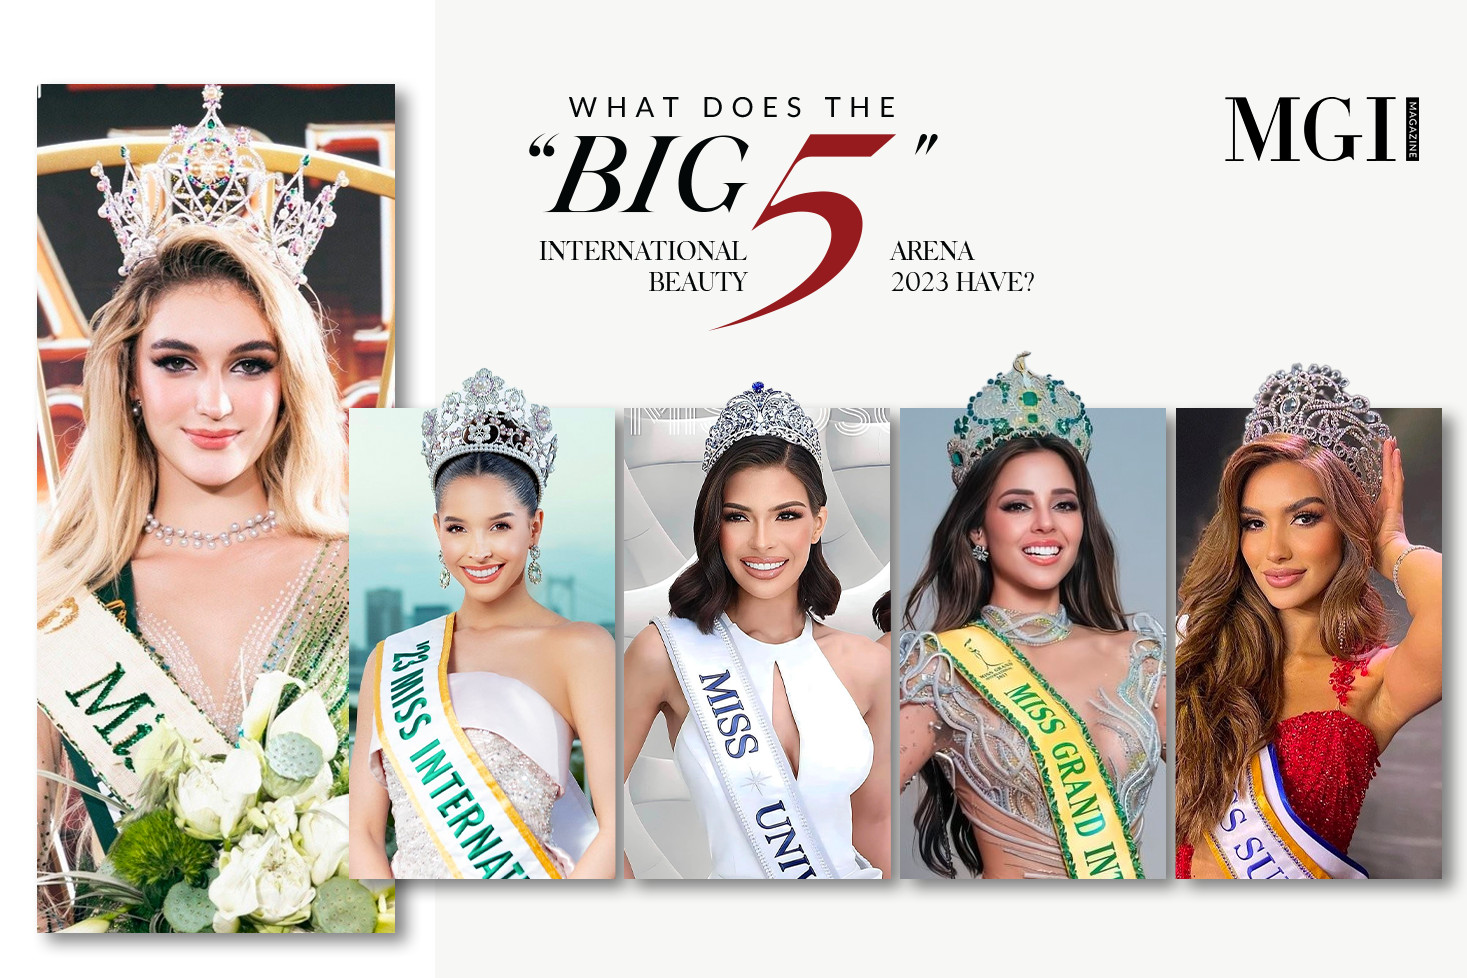 What are there in the "Big 5" international beauty arenas of 2023?